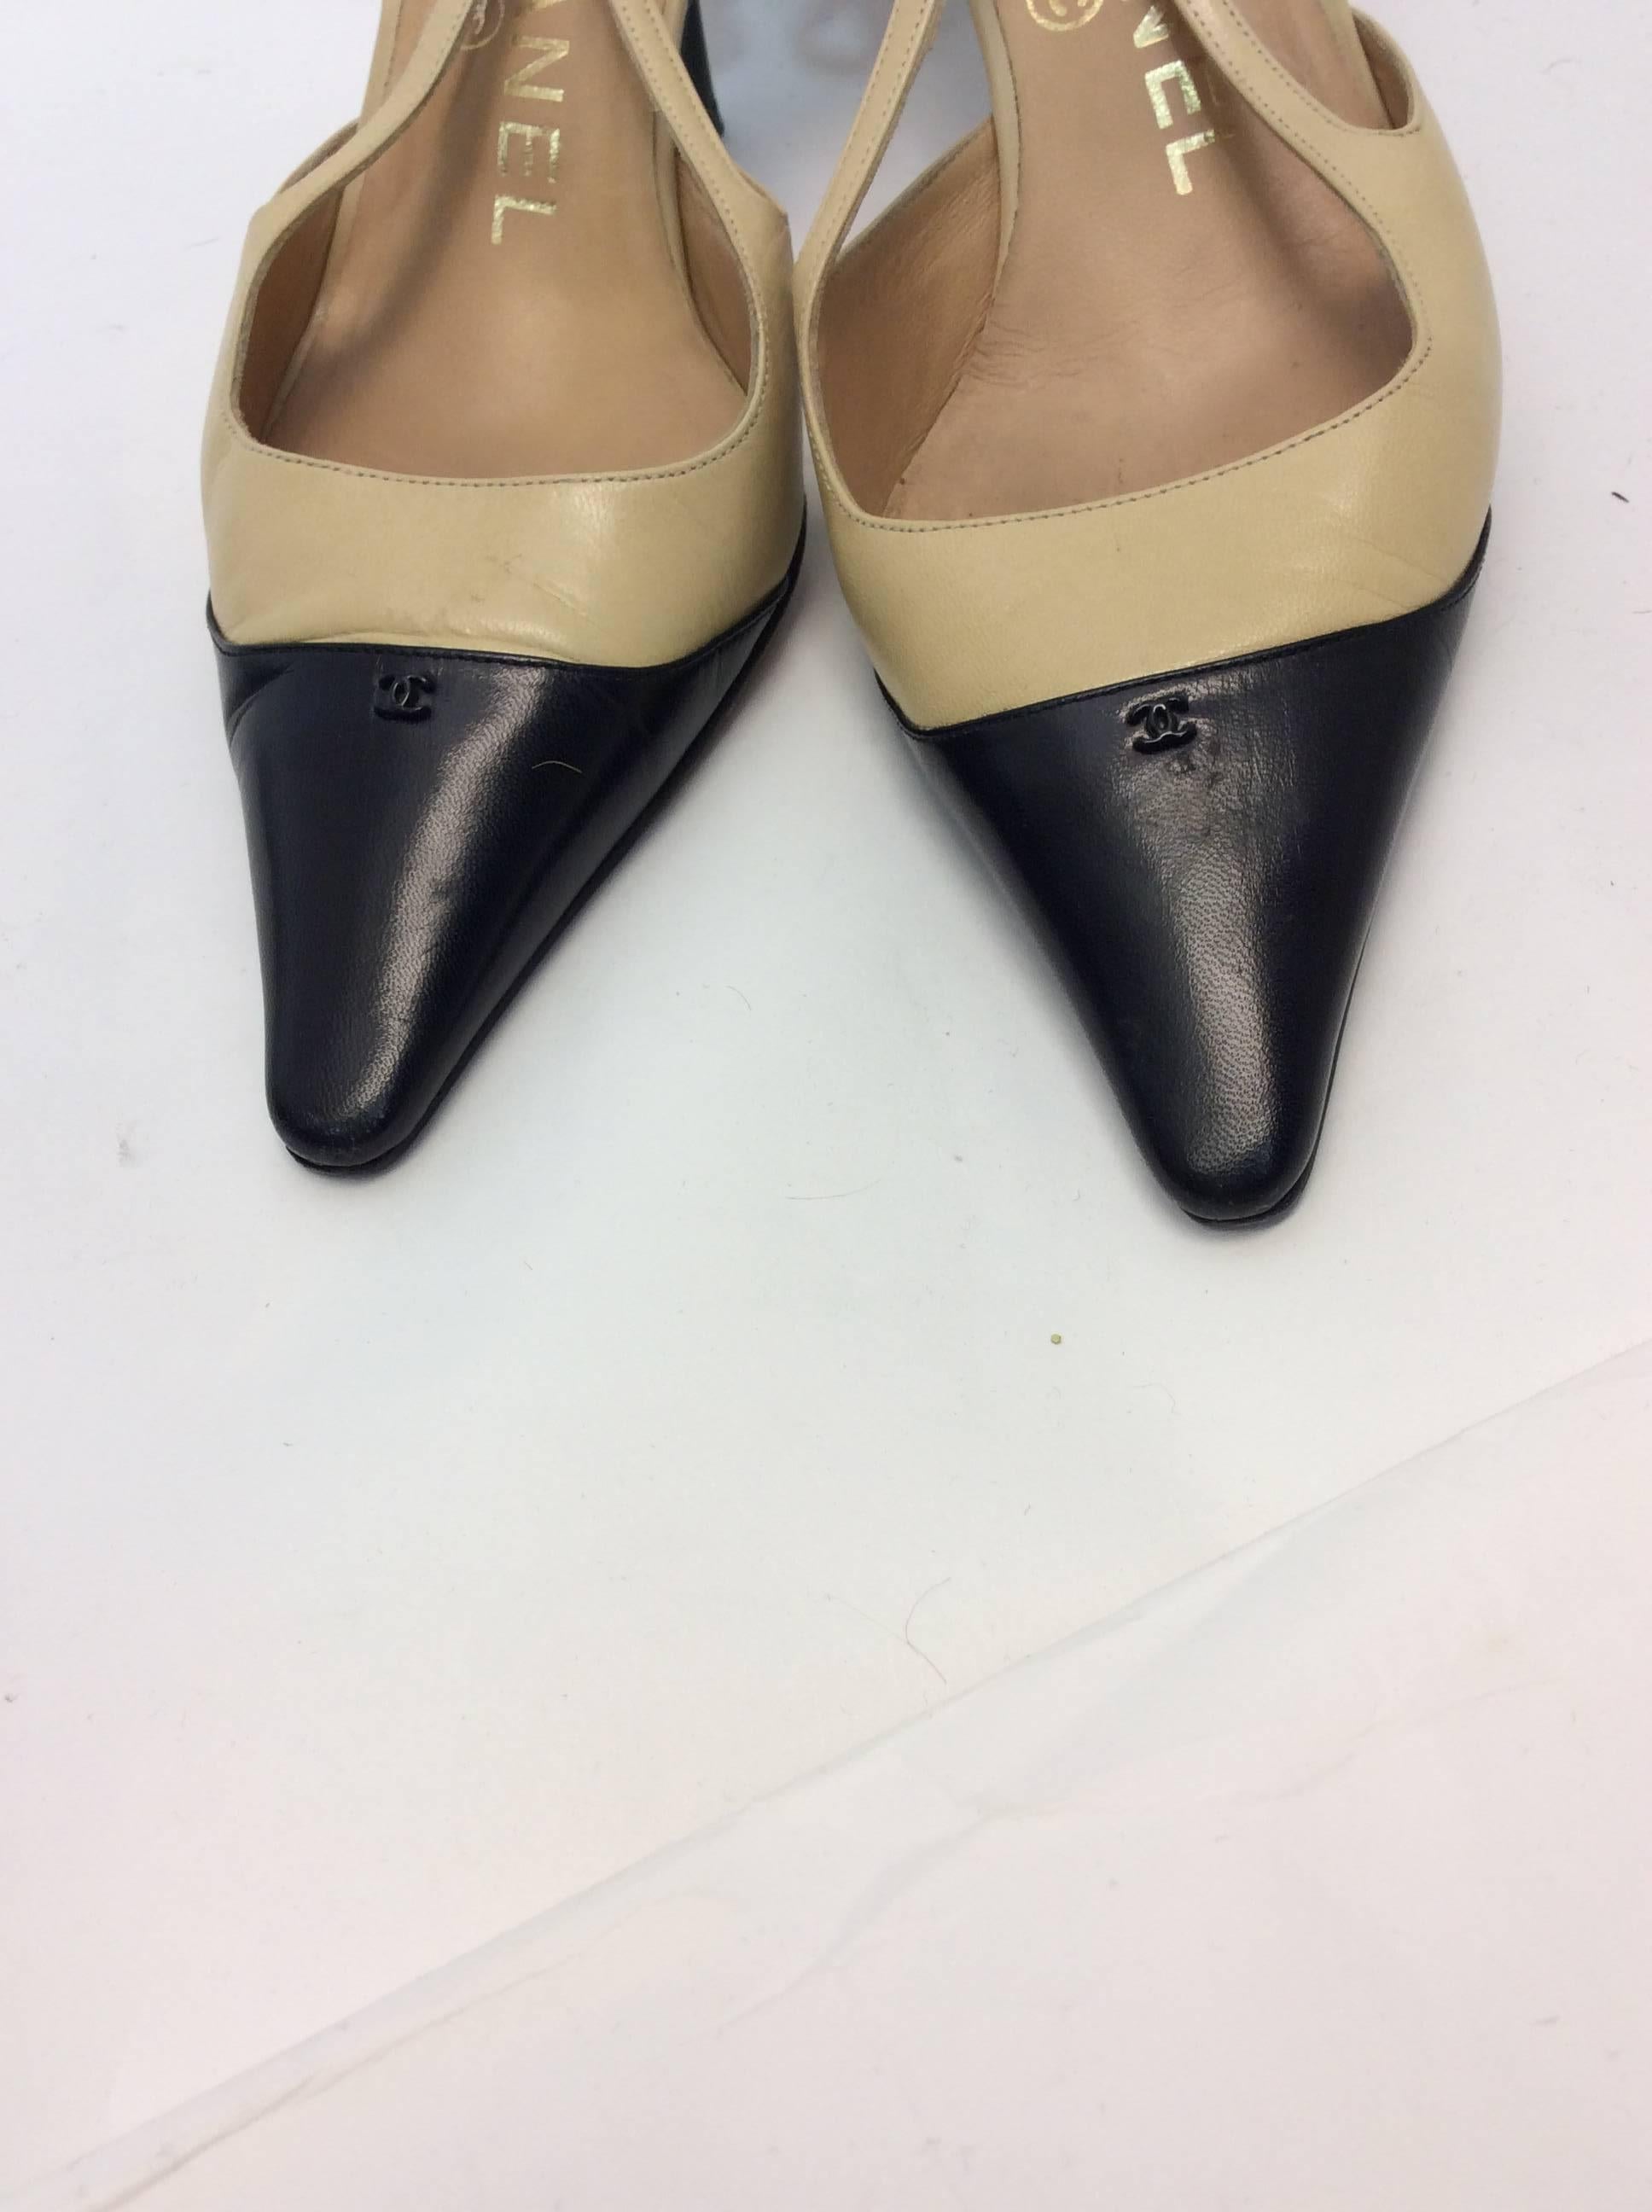 Chanel Two Tone Leather Heels
Size 36
$299
3.5 inch heels
